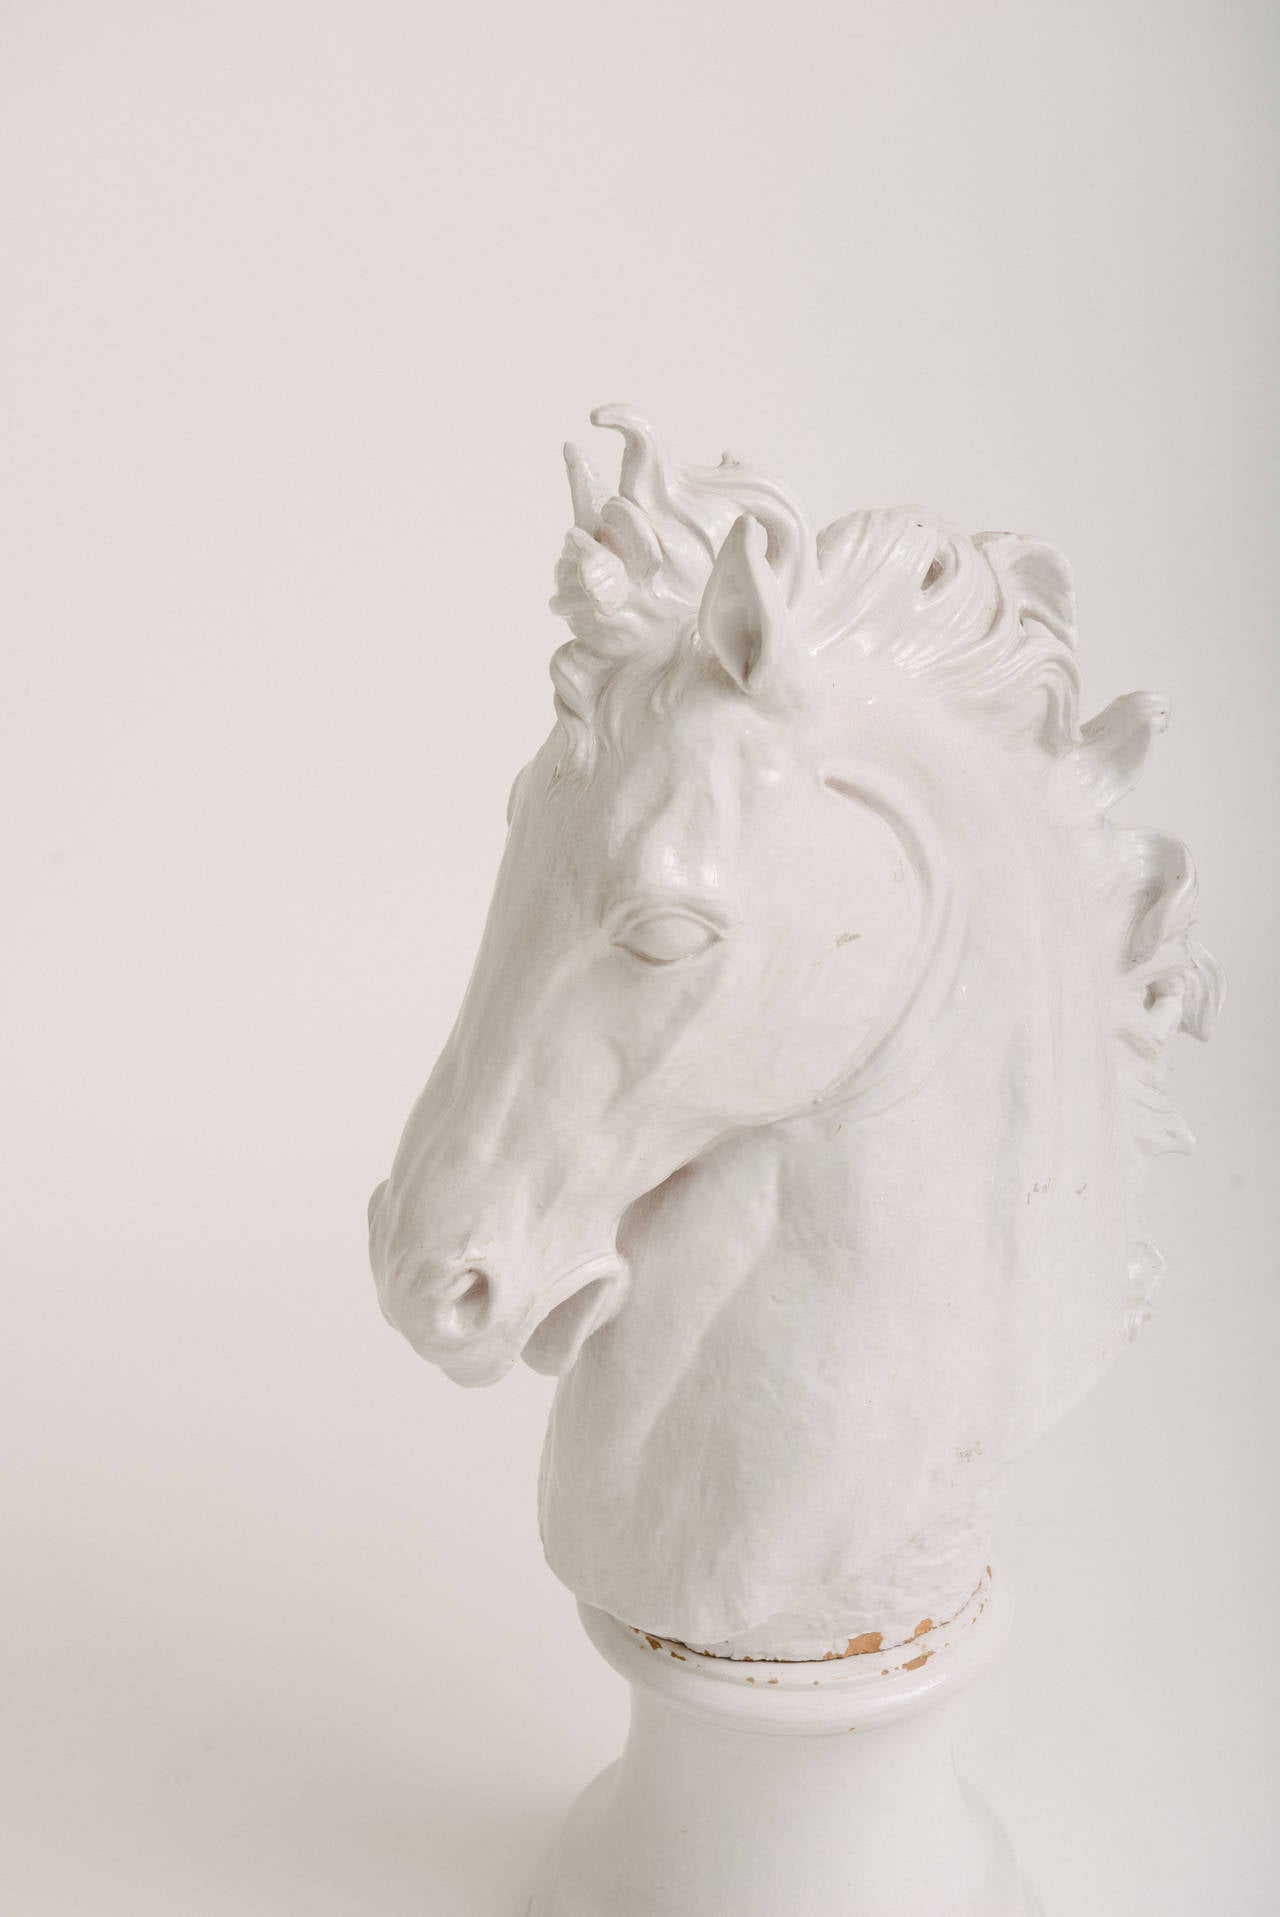 Stately Italian white glazed terra cotta horse head sculpture on stand. Small chipping of glaze where base meets sculpture. Easily touched up if desired.